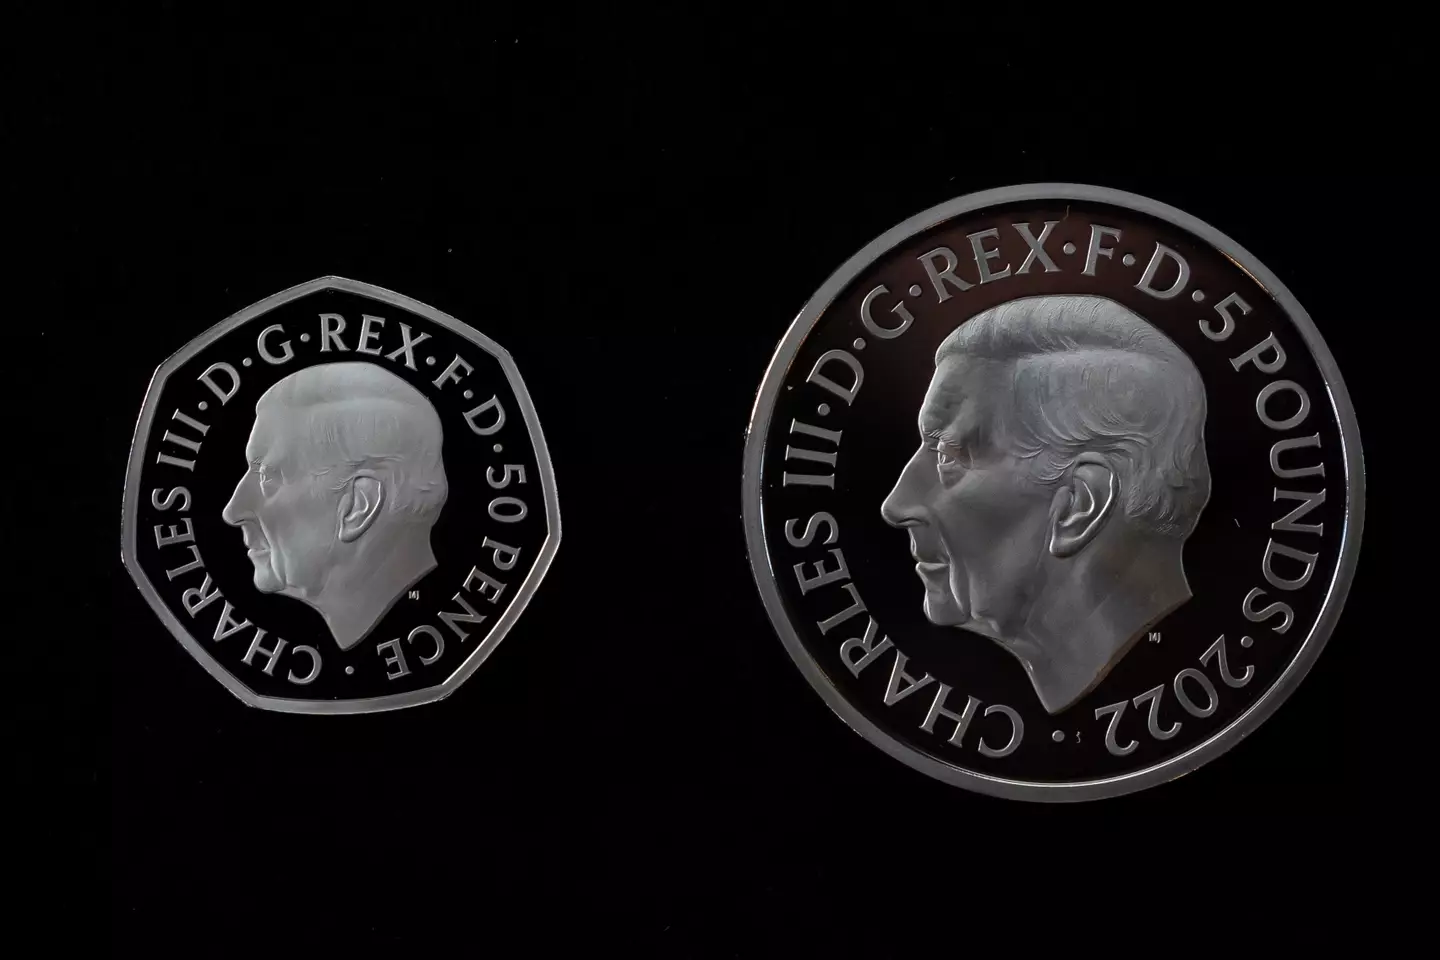 The new coins featuring King Charles III.